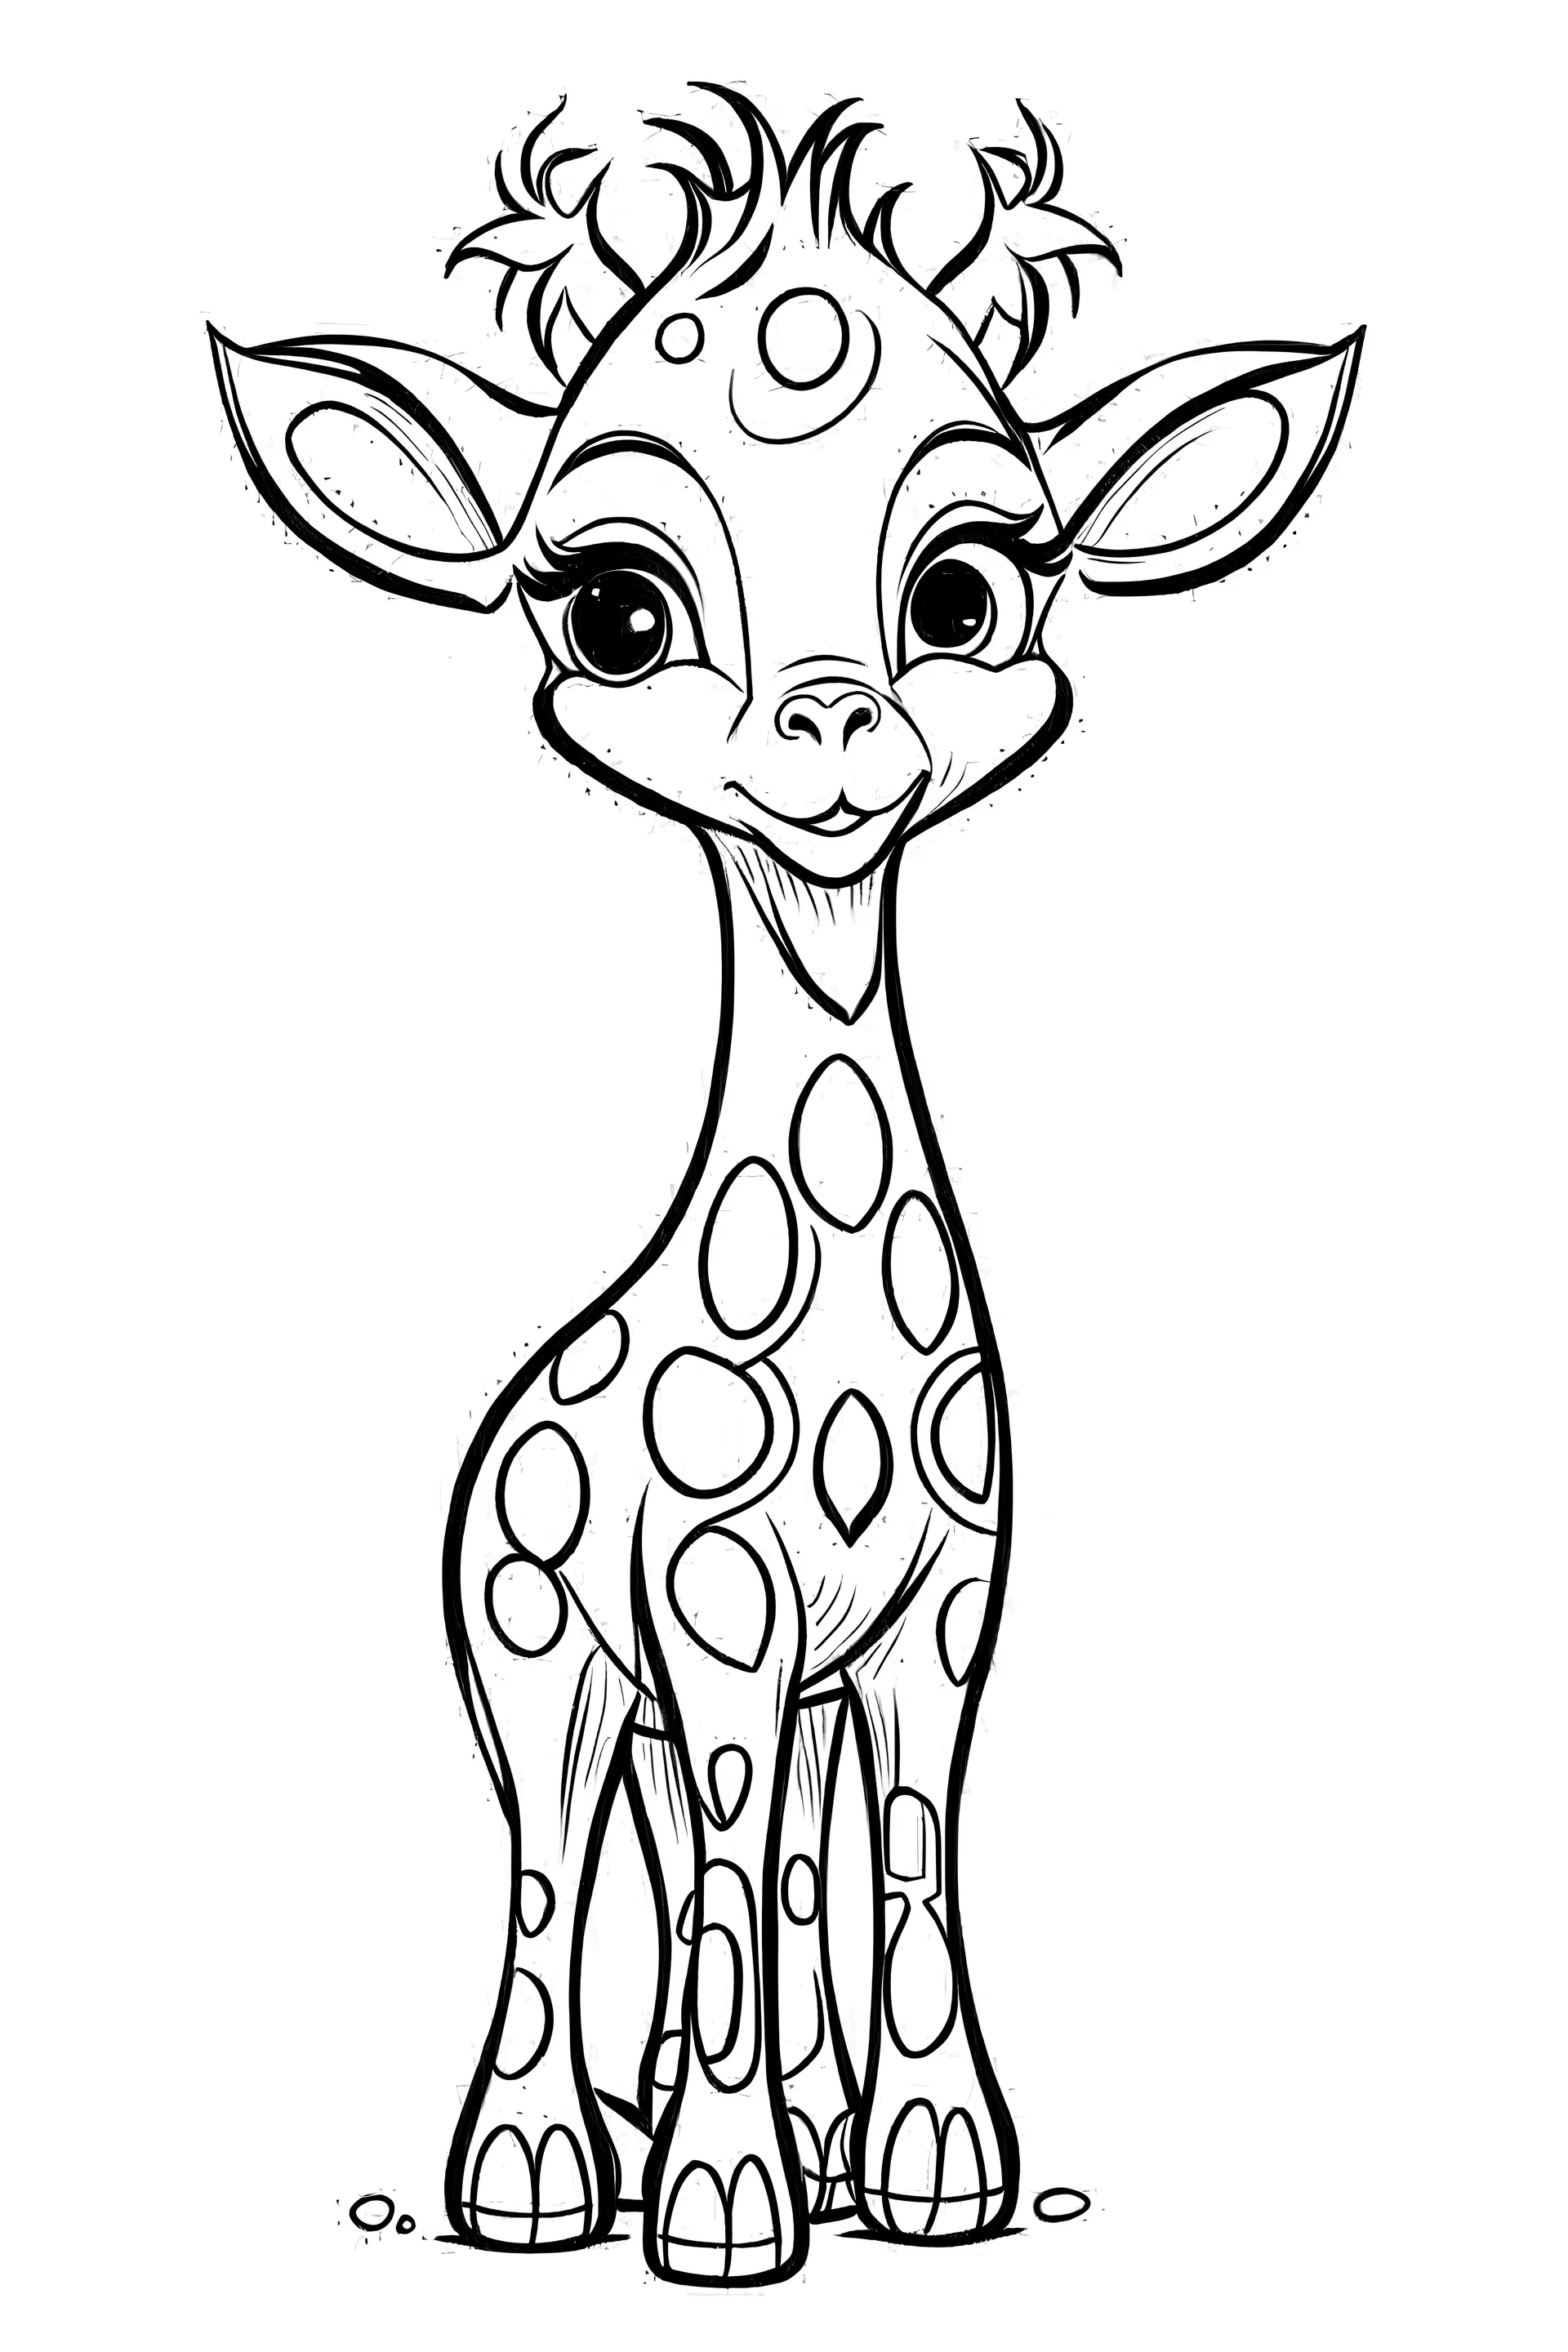 outline art for cute baby giraffe coloring page for kids, white background, sketch style, full body, only use outline, cartoon style, clean line art, no shadows, clear and well outlined